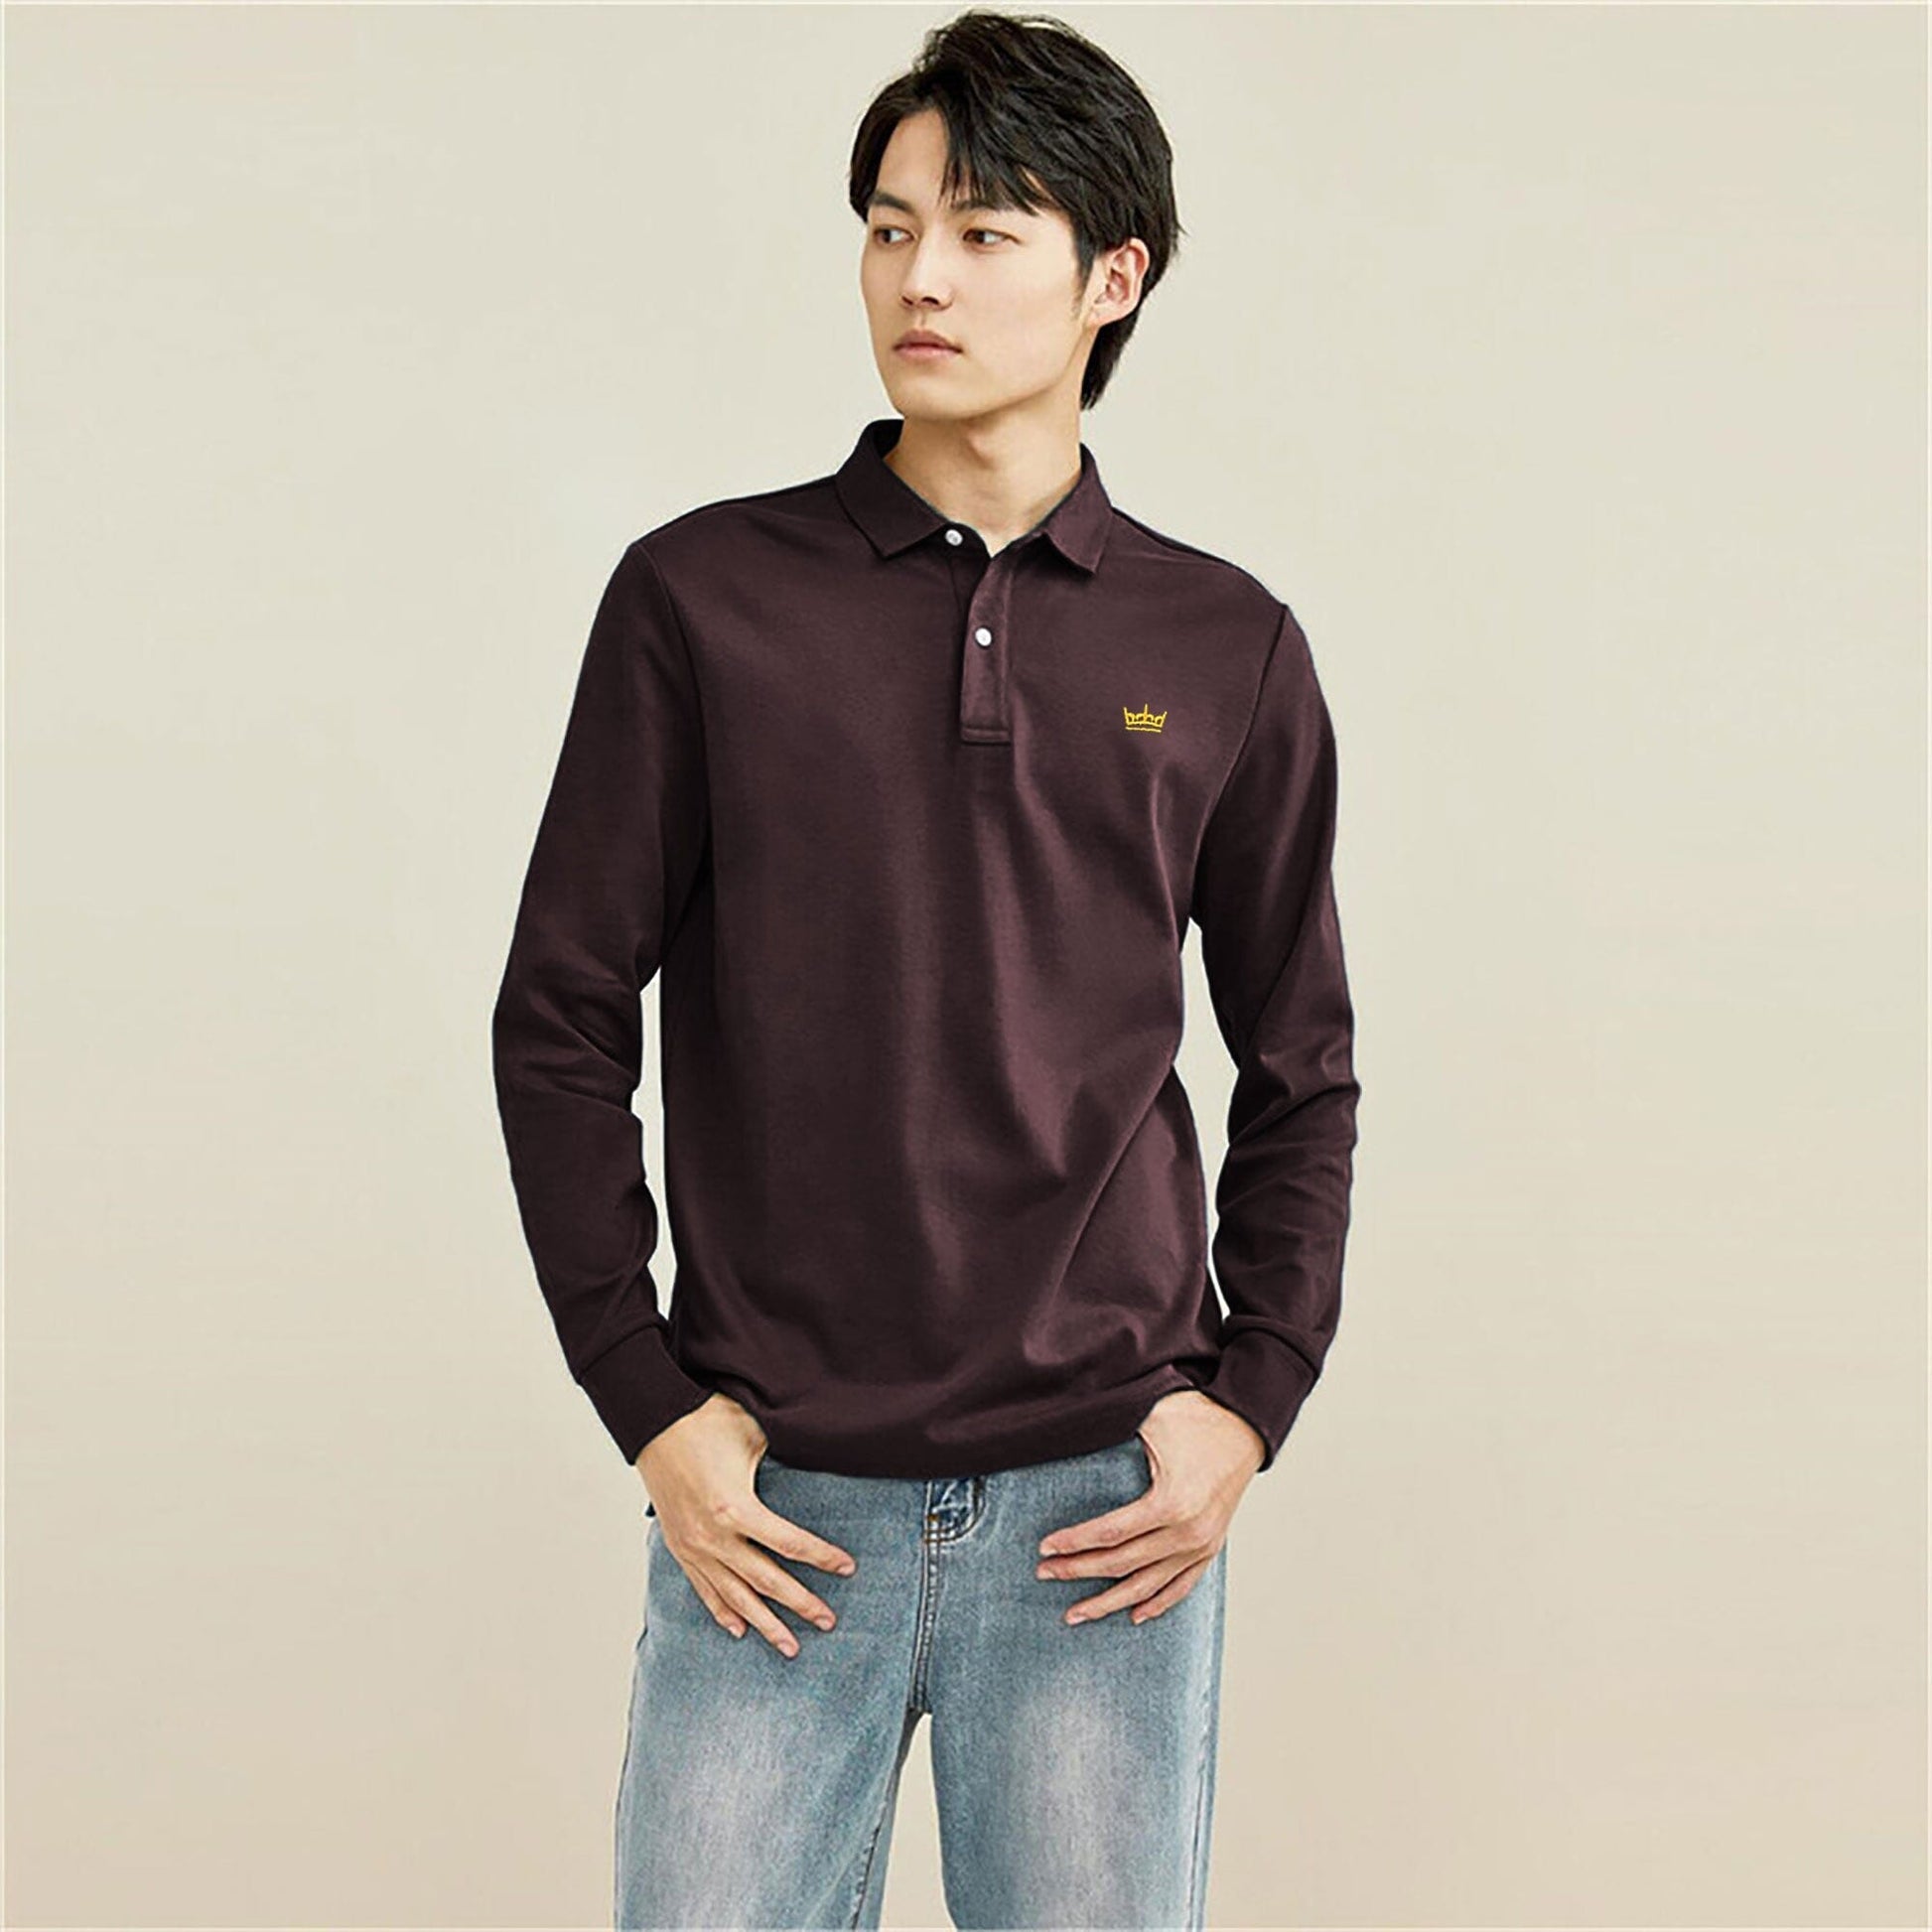 Industrialize Men's Crown Embroidered Long Sleeve Polo Shirt Men's Polo Shirt IST Burgundy 2XS 